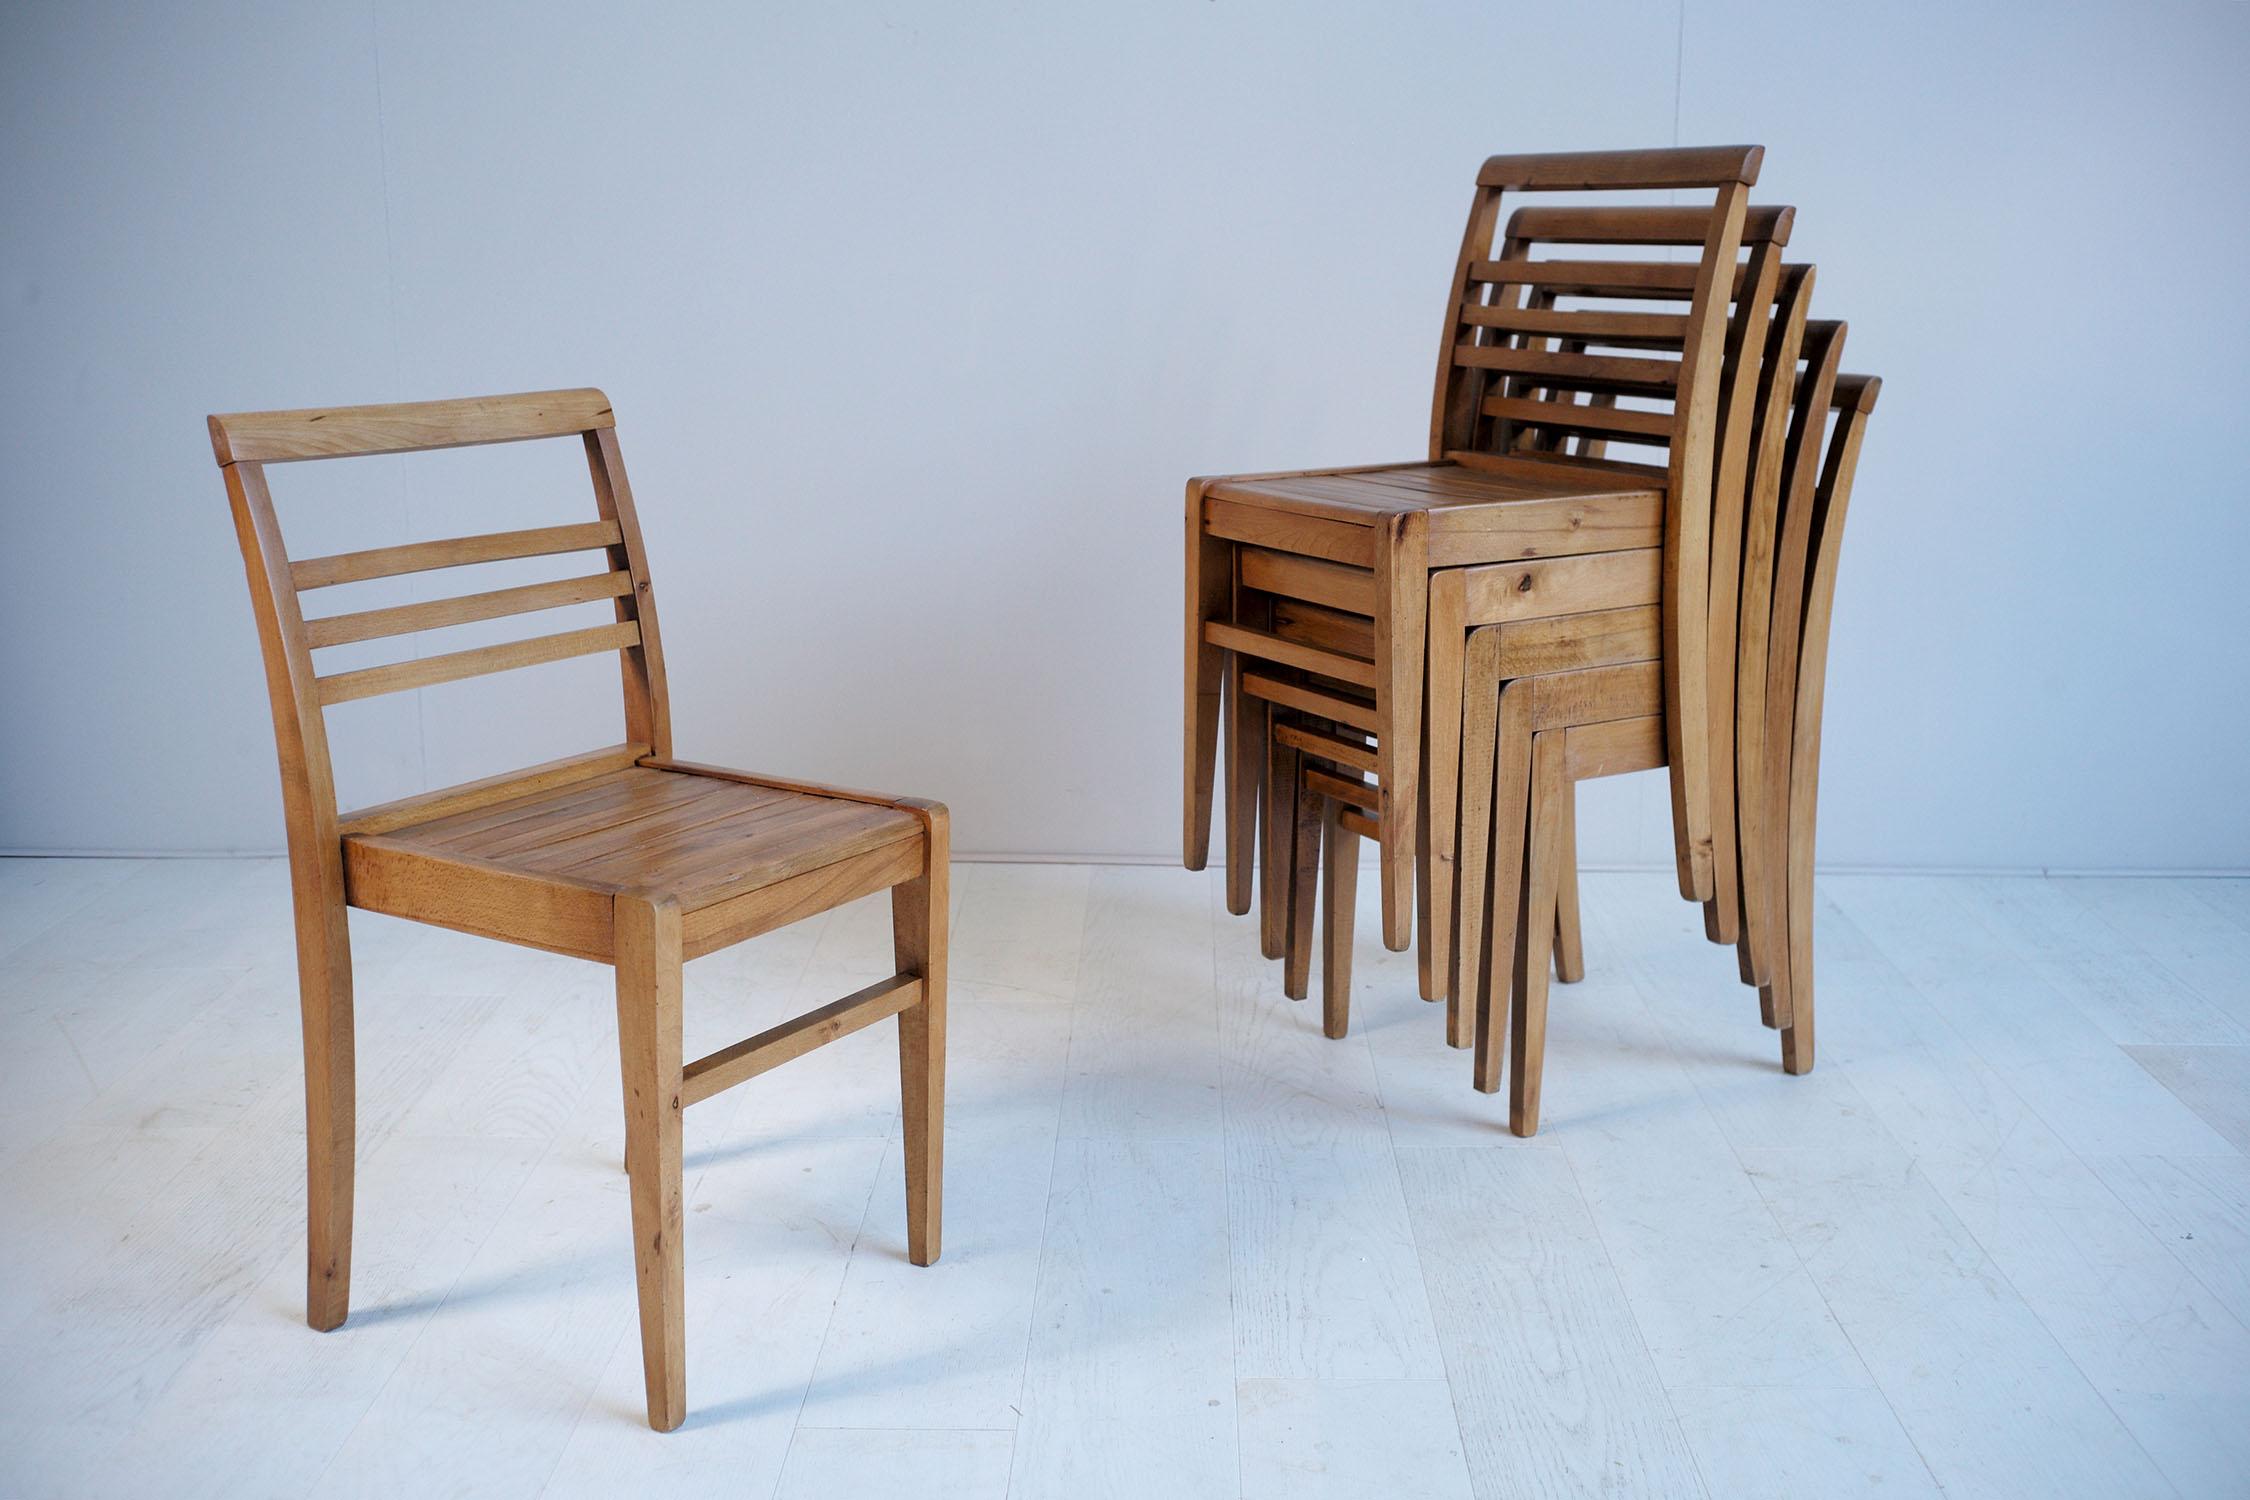 Series of six stackable chairs in oiled beech by René Gabriel, Period of the French Reconstruction (1945-1955).
These chairs are part of the emergency furniture provided to victims of the bombings of the 1939-1945 war. One of the most influential